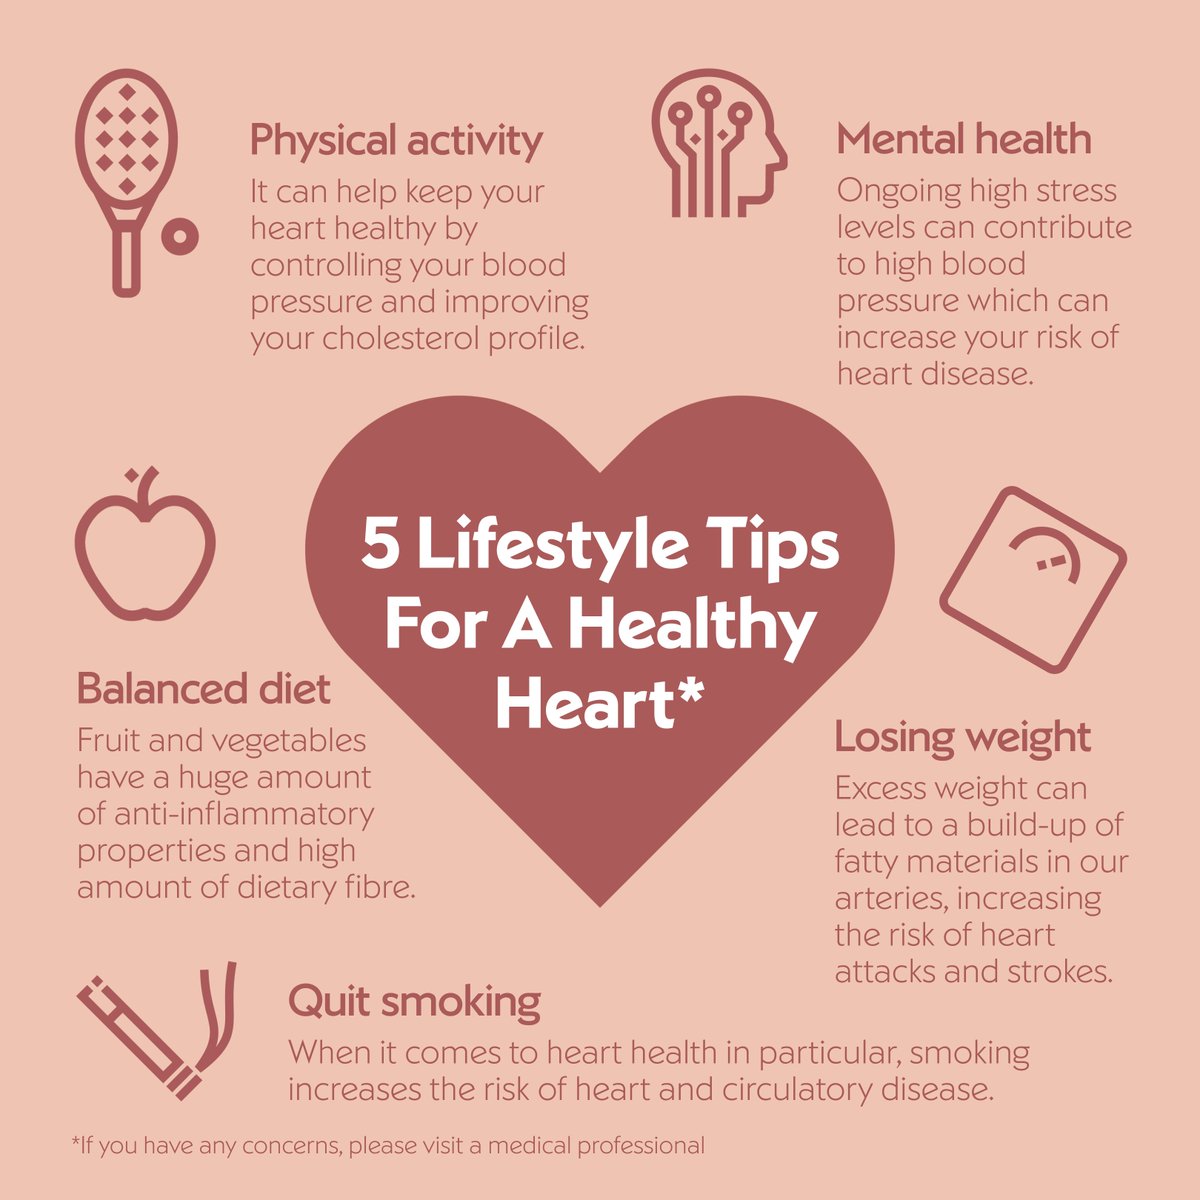 Heart health problems can affect anyone and be caused by lifestyle choices or factors beyond our control, such as family history, age and ethnicity. Here are five steps you can take to mitigate the risks: bit.ly/3YgViPY #HeartHealthMonth